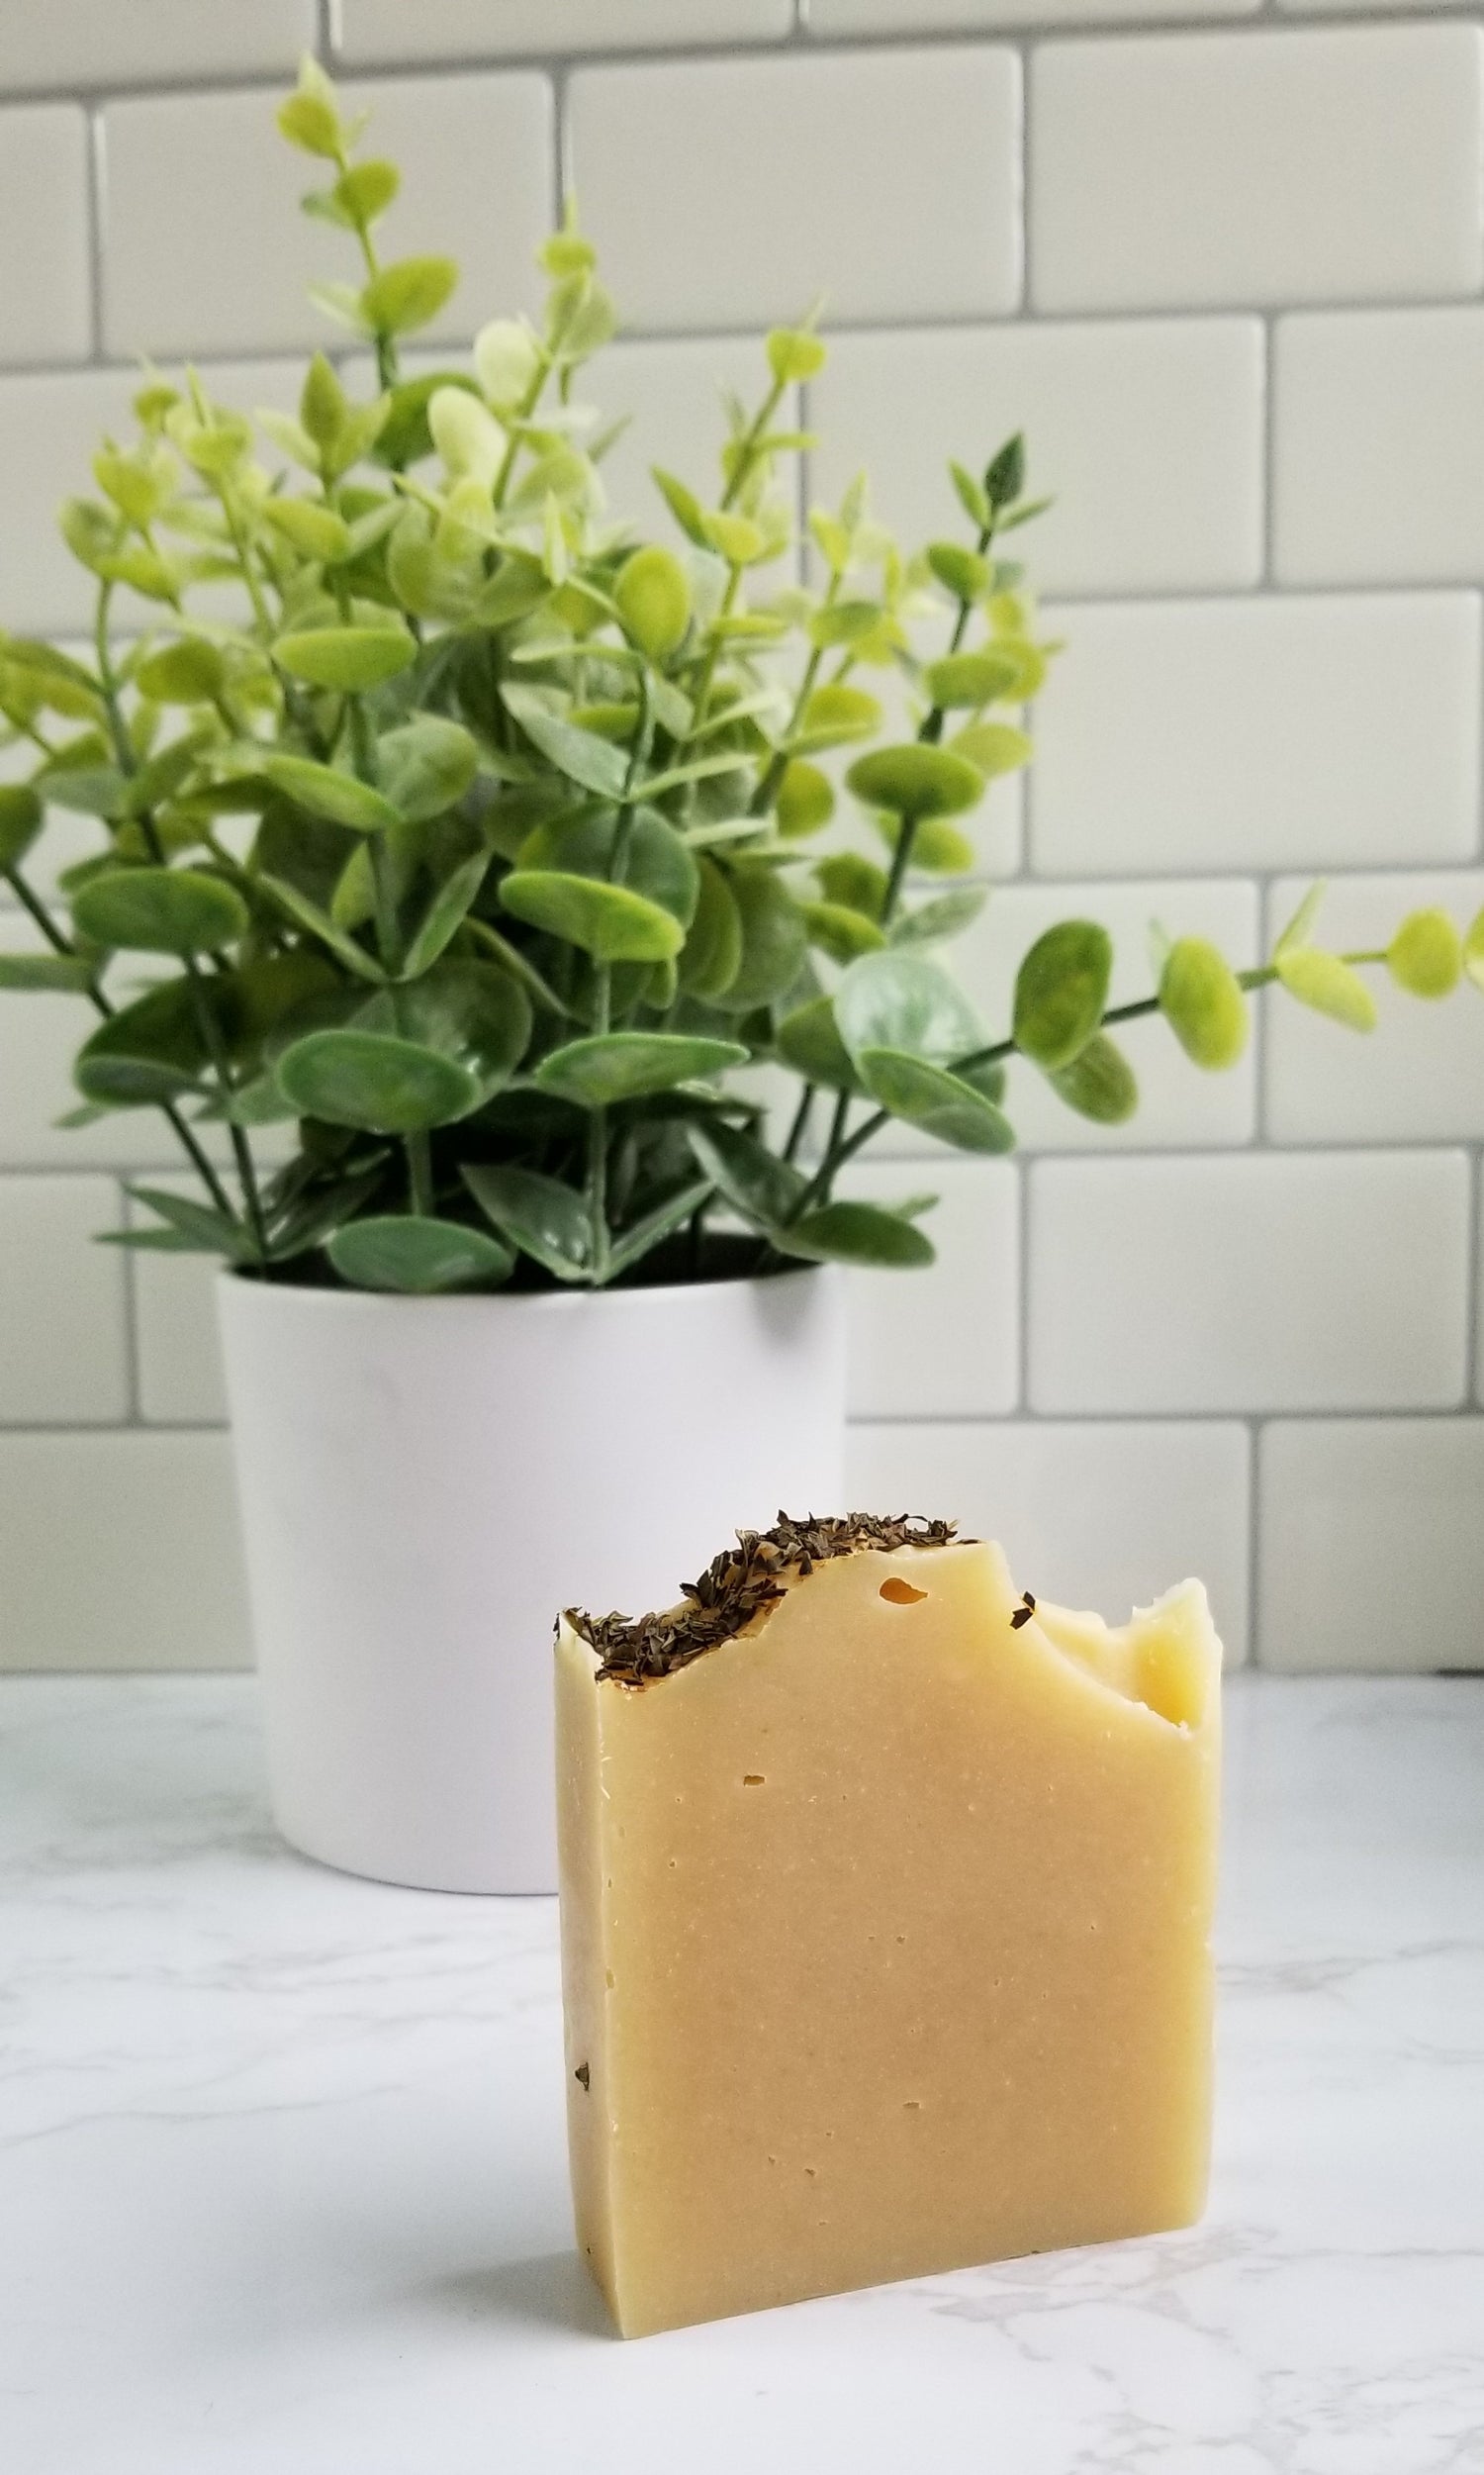 soap with herbs on top